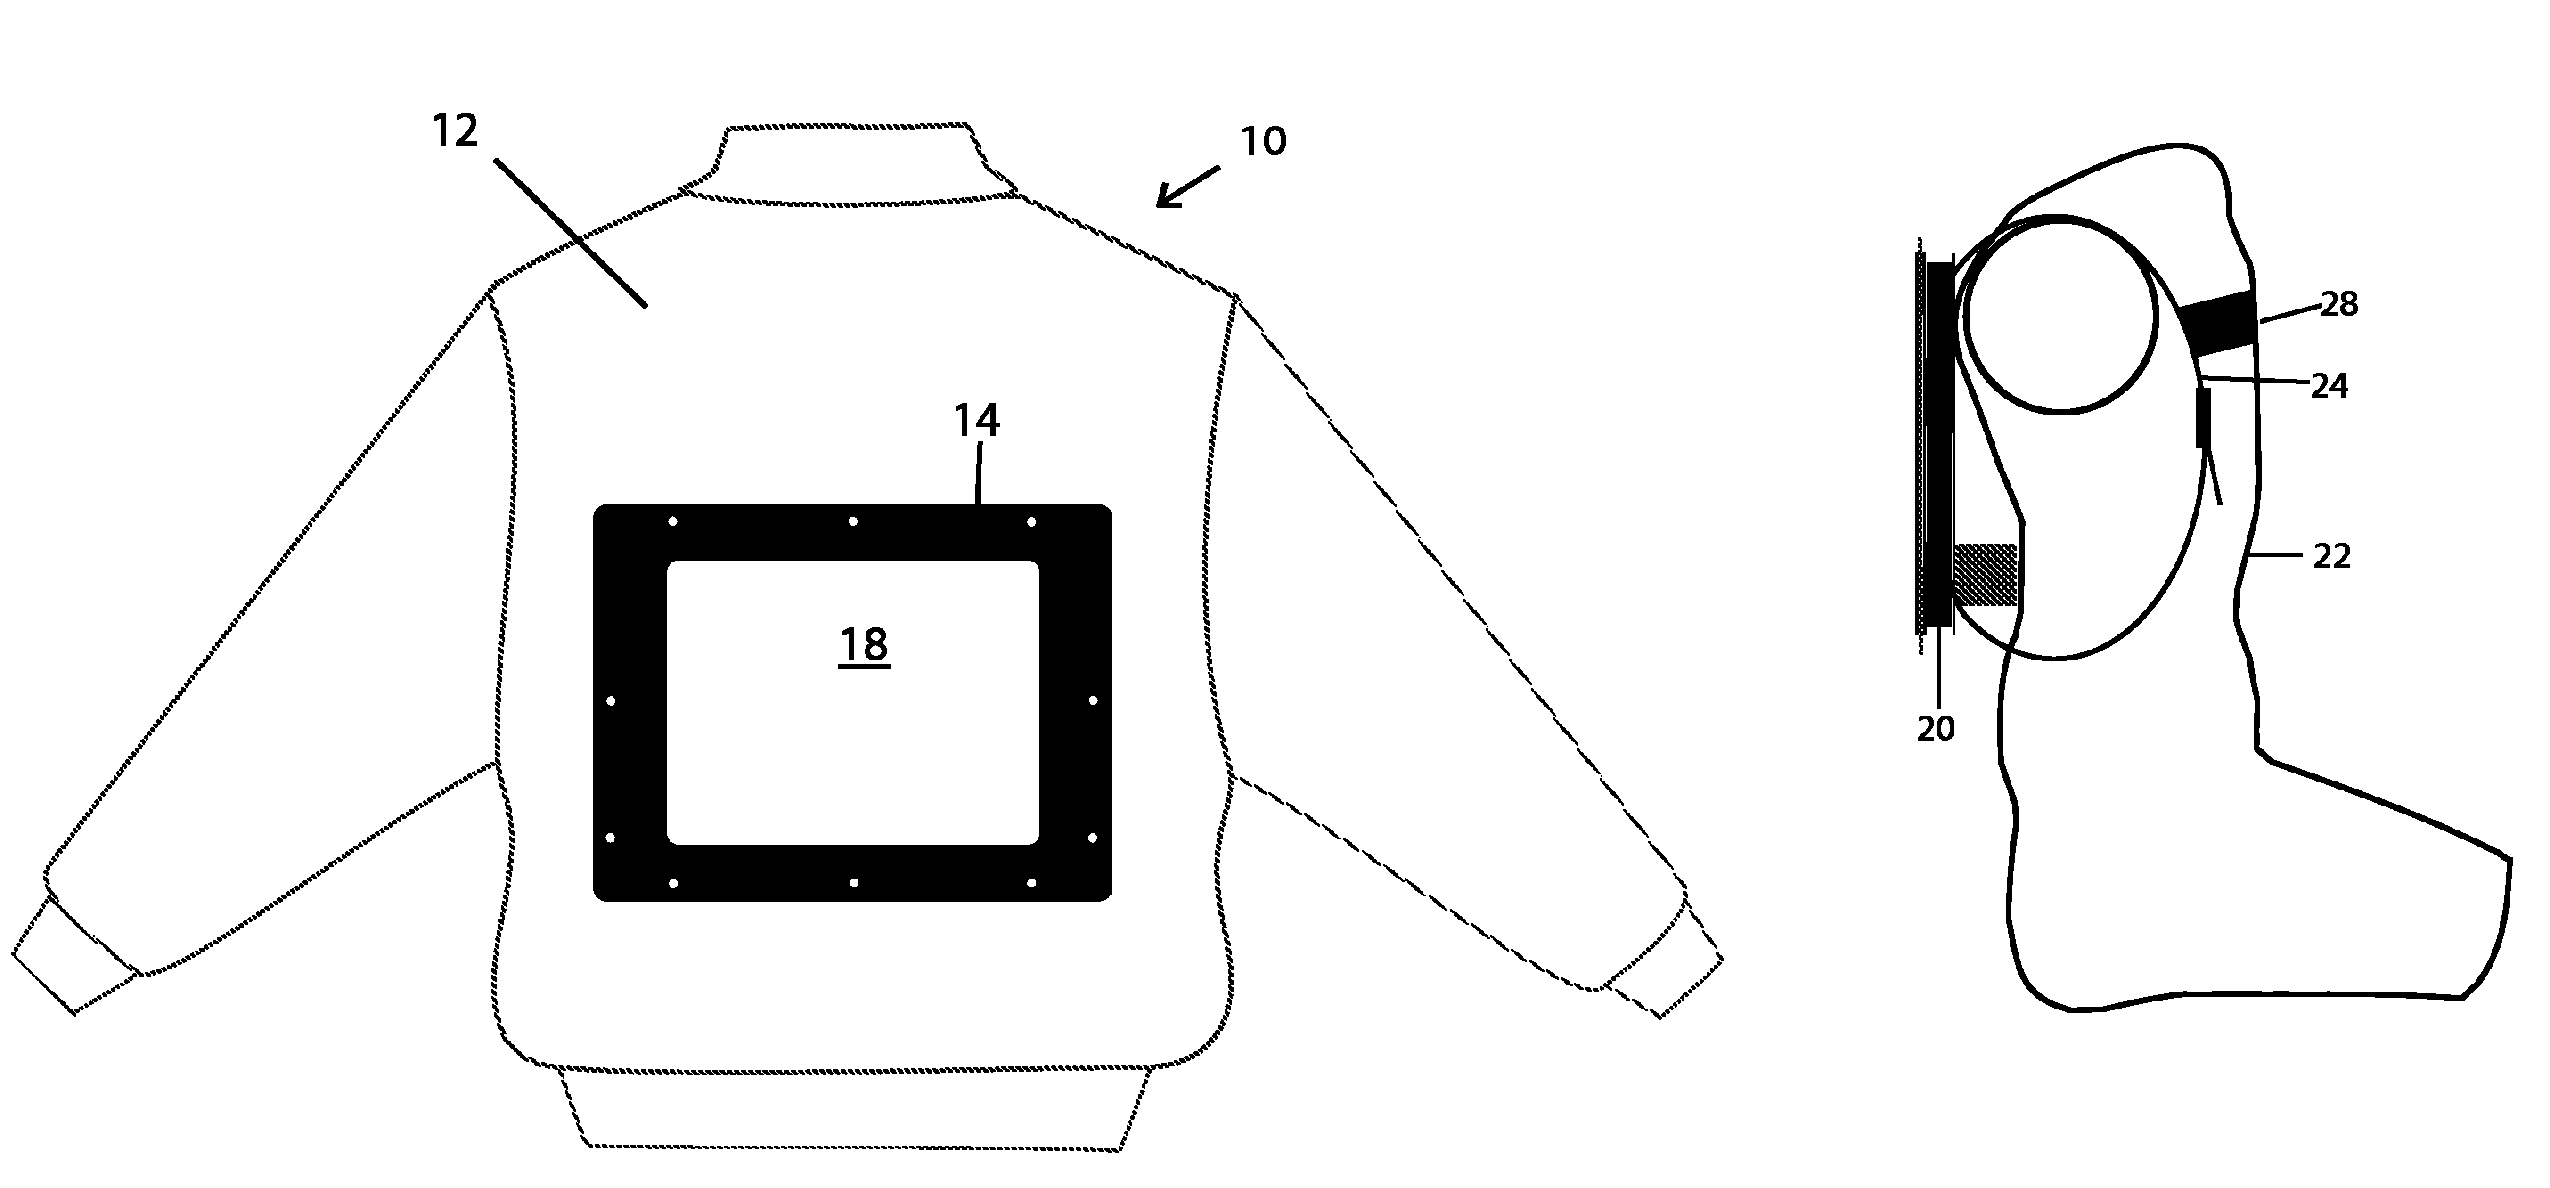 Display system in article of clothing